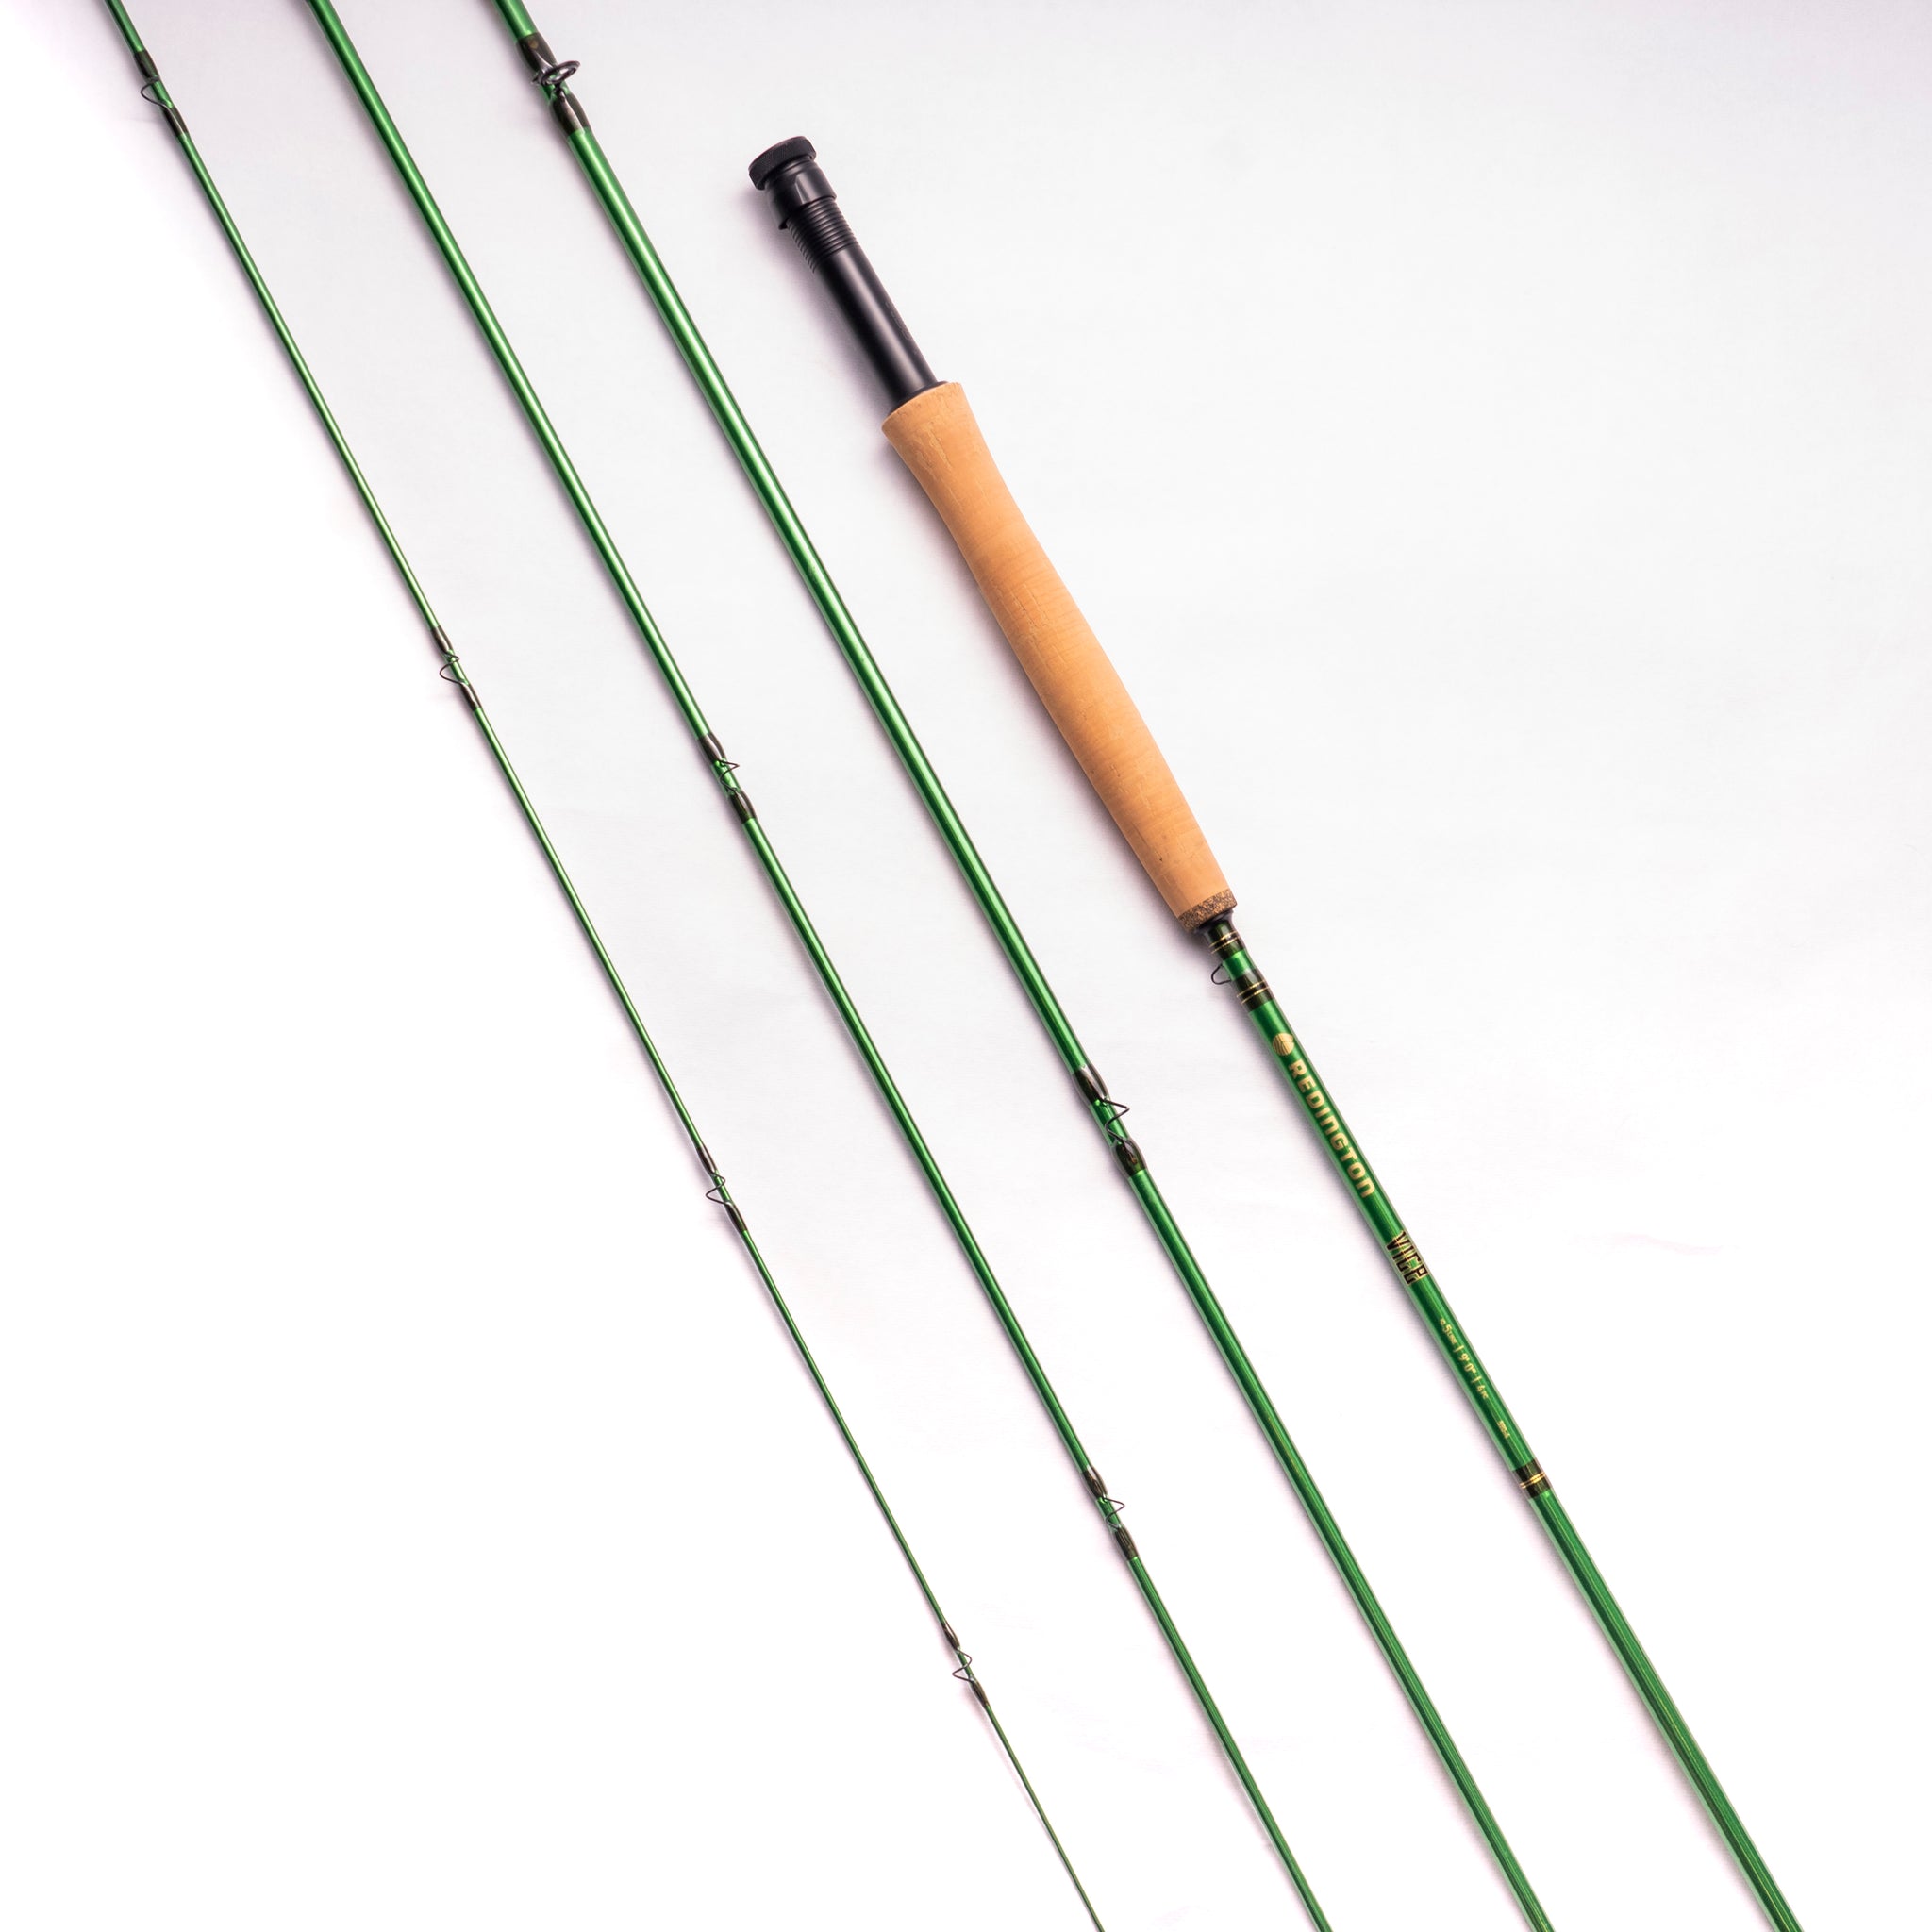 vint trimarc telescopic fly rod with pflueger sa-trout no 1554 reel made  usa